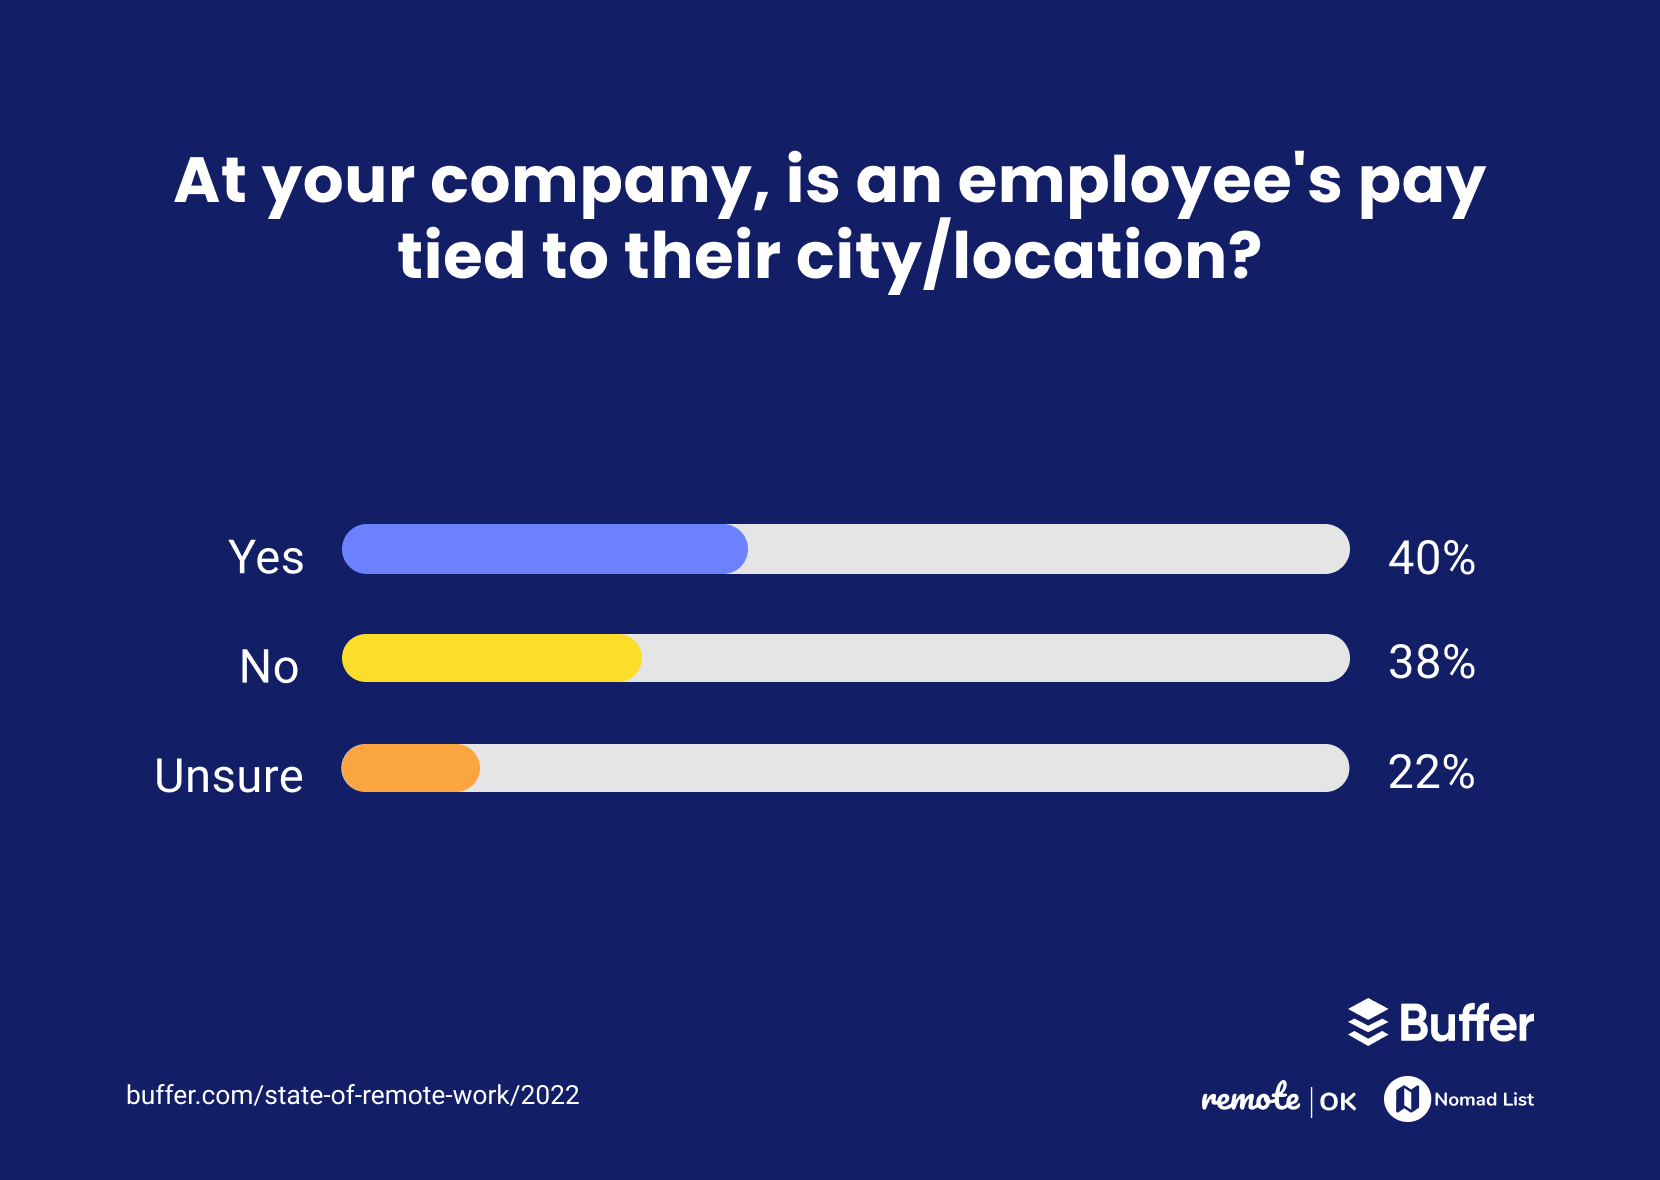 At your company, is an employee's pay tied to their city/location?